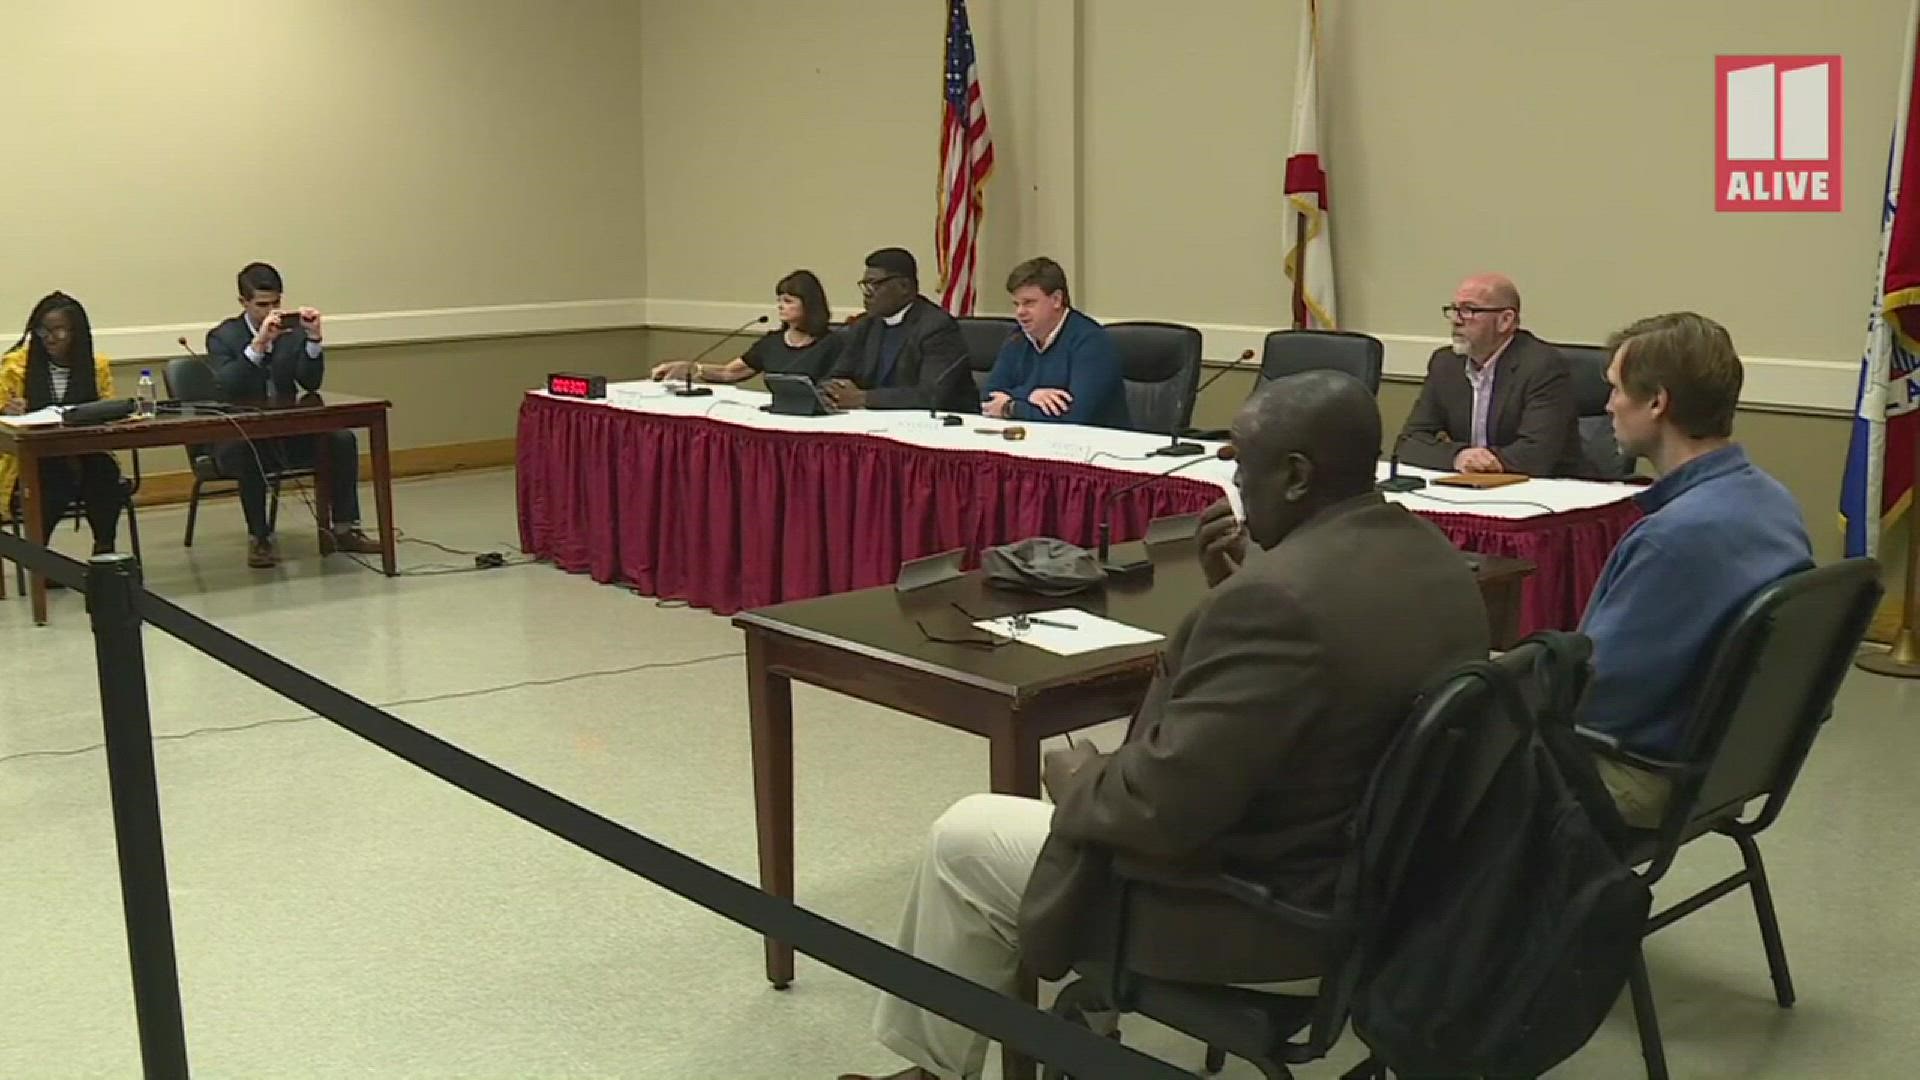 The city of Anniston held an emergency city council meeting on Sunday morning to discuss how to oppose the federal decision to bring coronavirus patients to the city